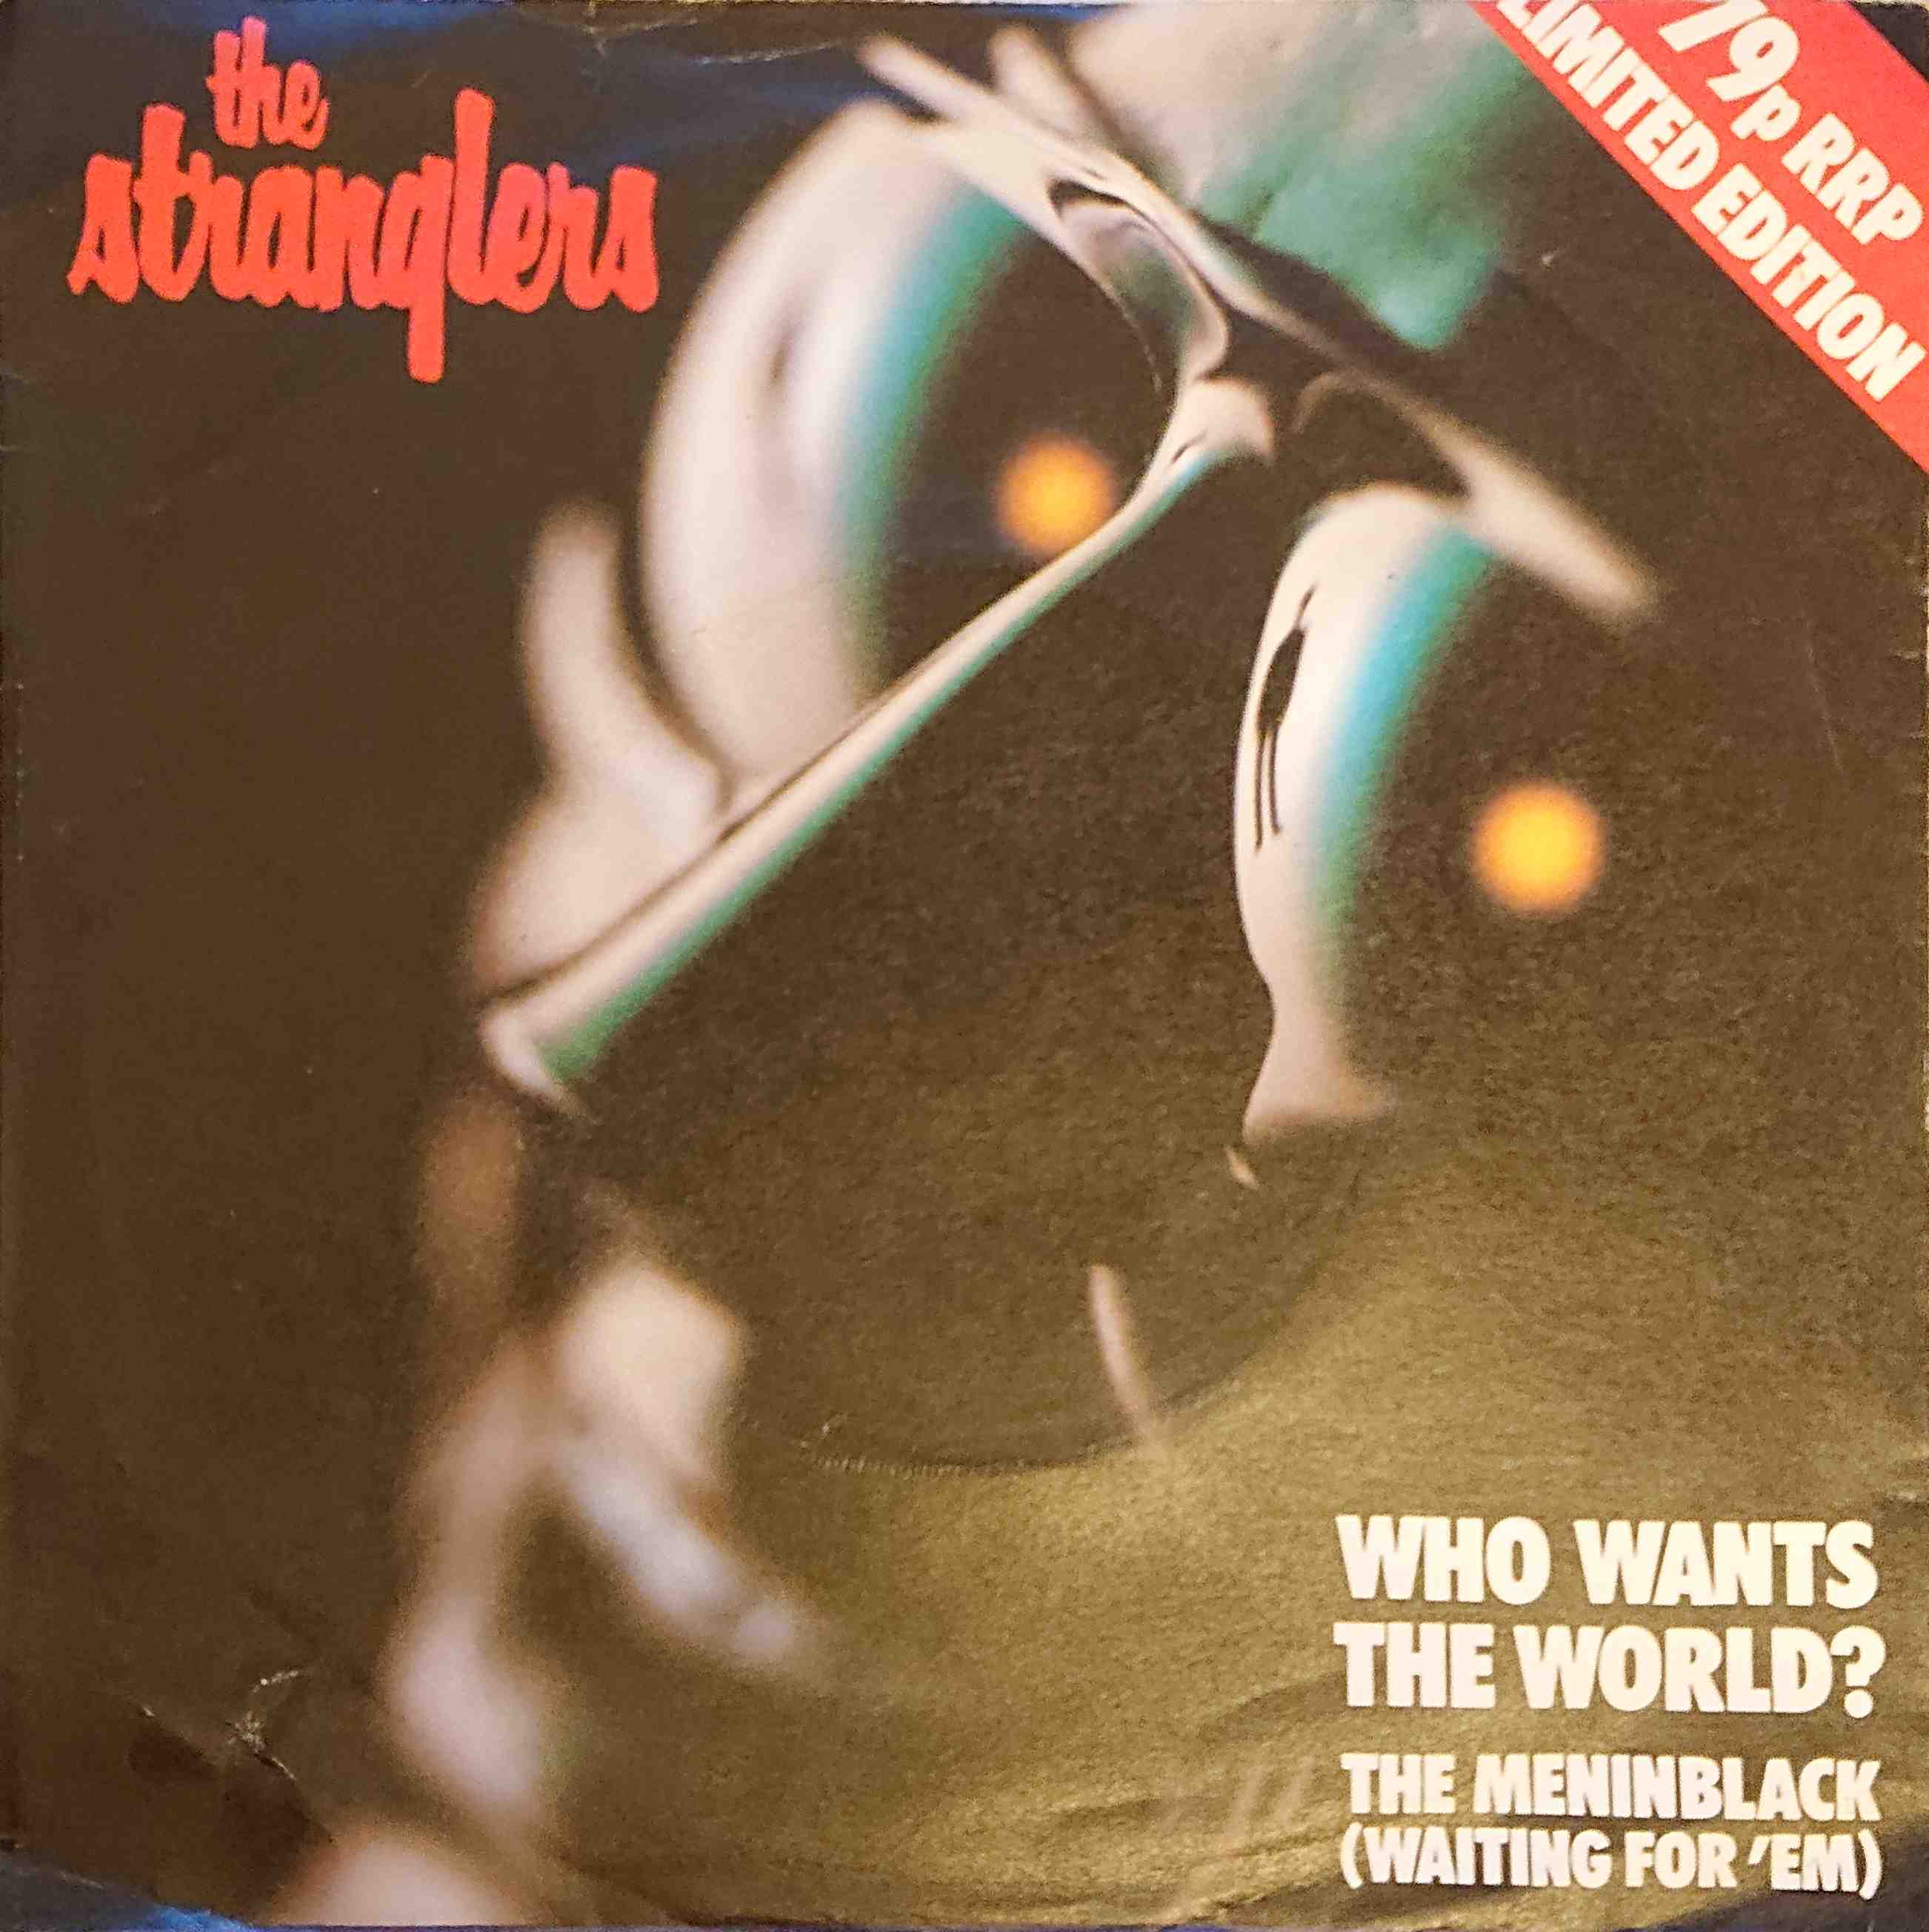 Picture of Who wants the World? by artist The Stranglers  from The Stranglers singles